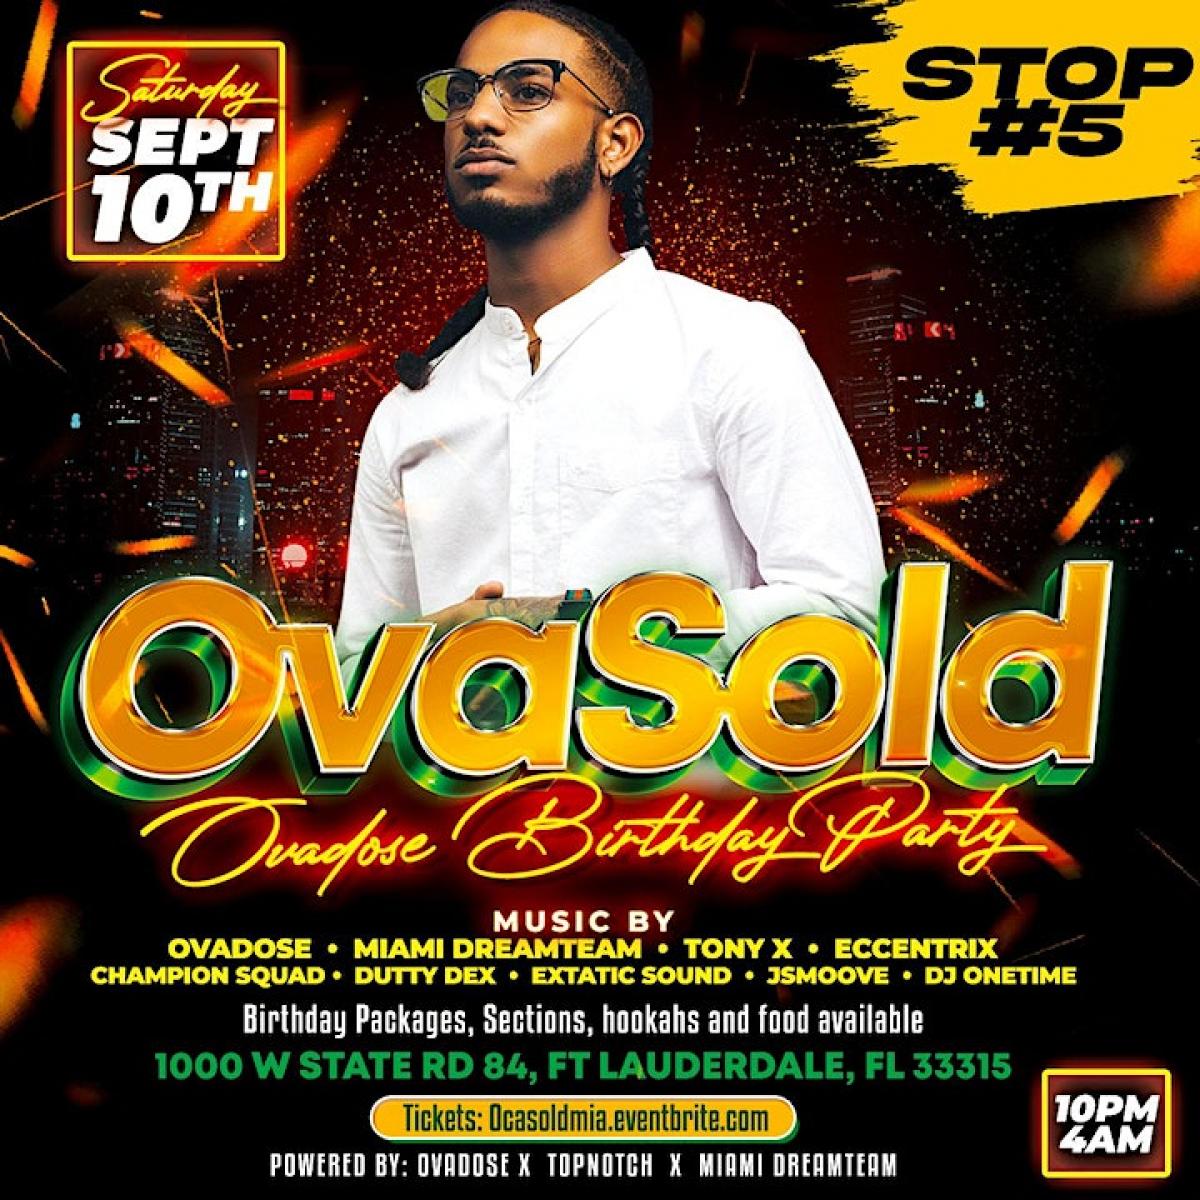 Ovasold flyer or graphic.